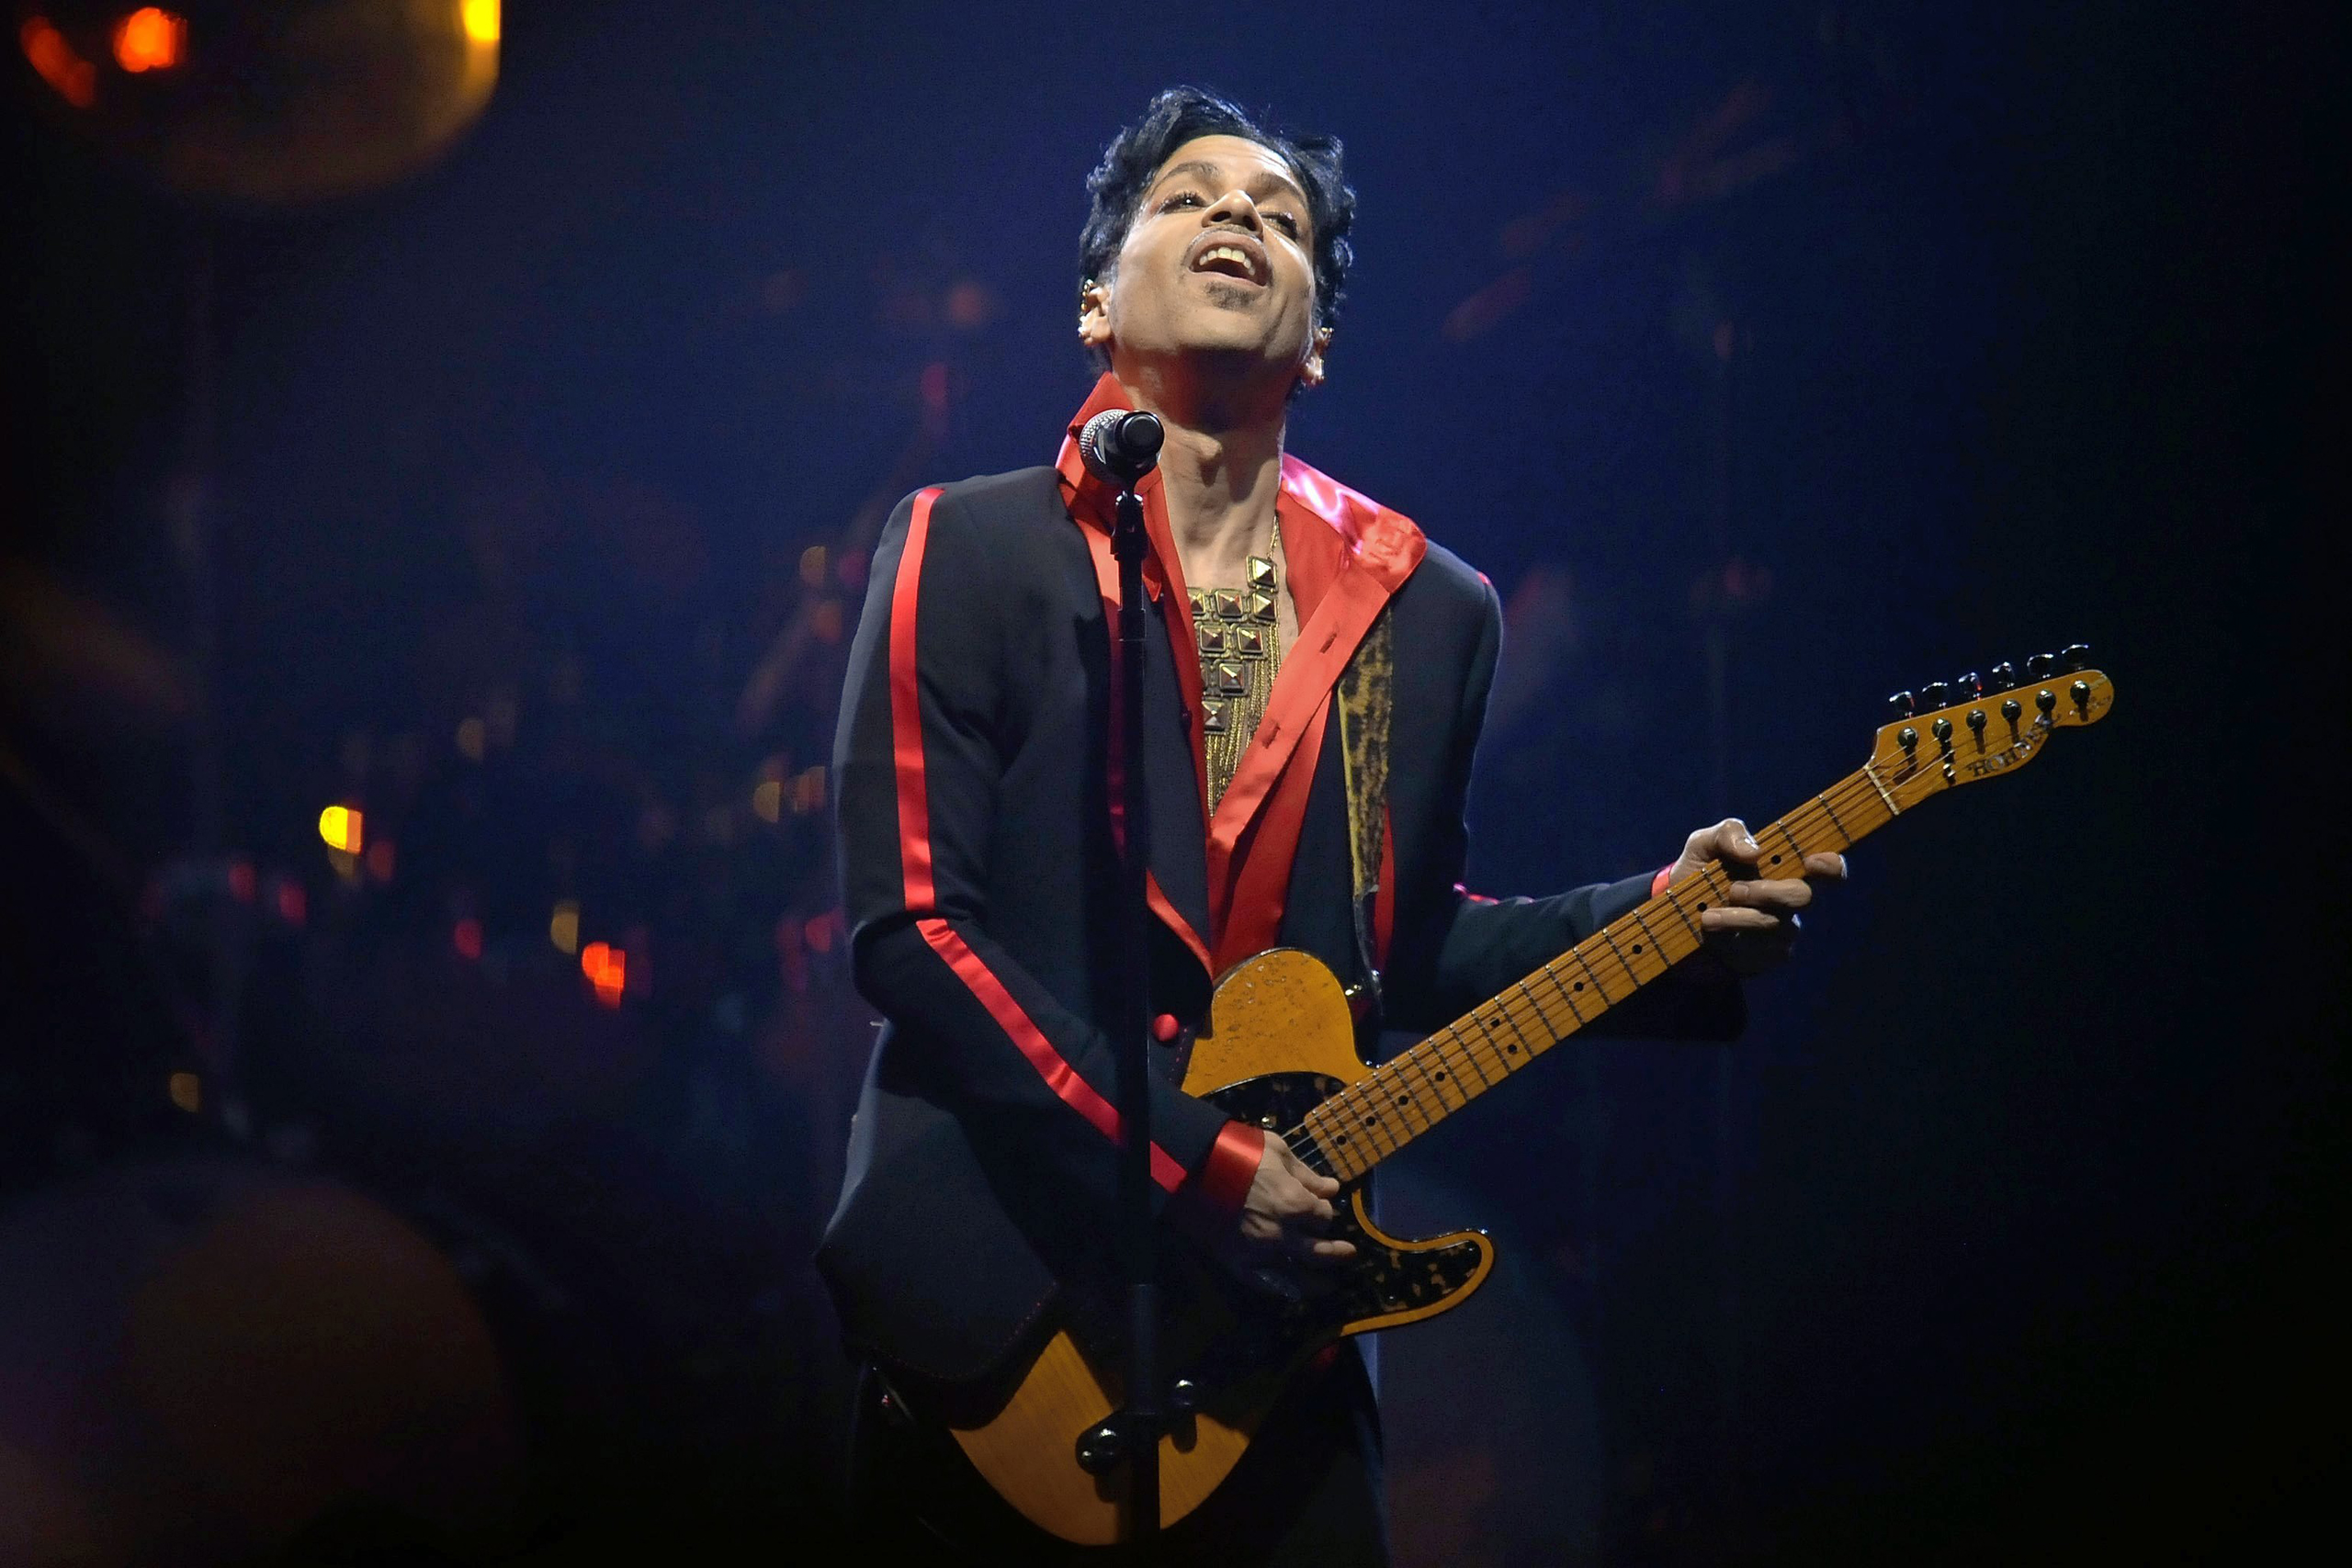 Prince, during his concert at the Sportpaleis in Antwerp, Belgium, Nov. 8, 2010. Correction: The original version of this caption misstated the date of a Prince concert. It was Nov. 8, 2010. (Dirk Waem—EPA)